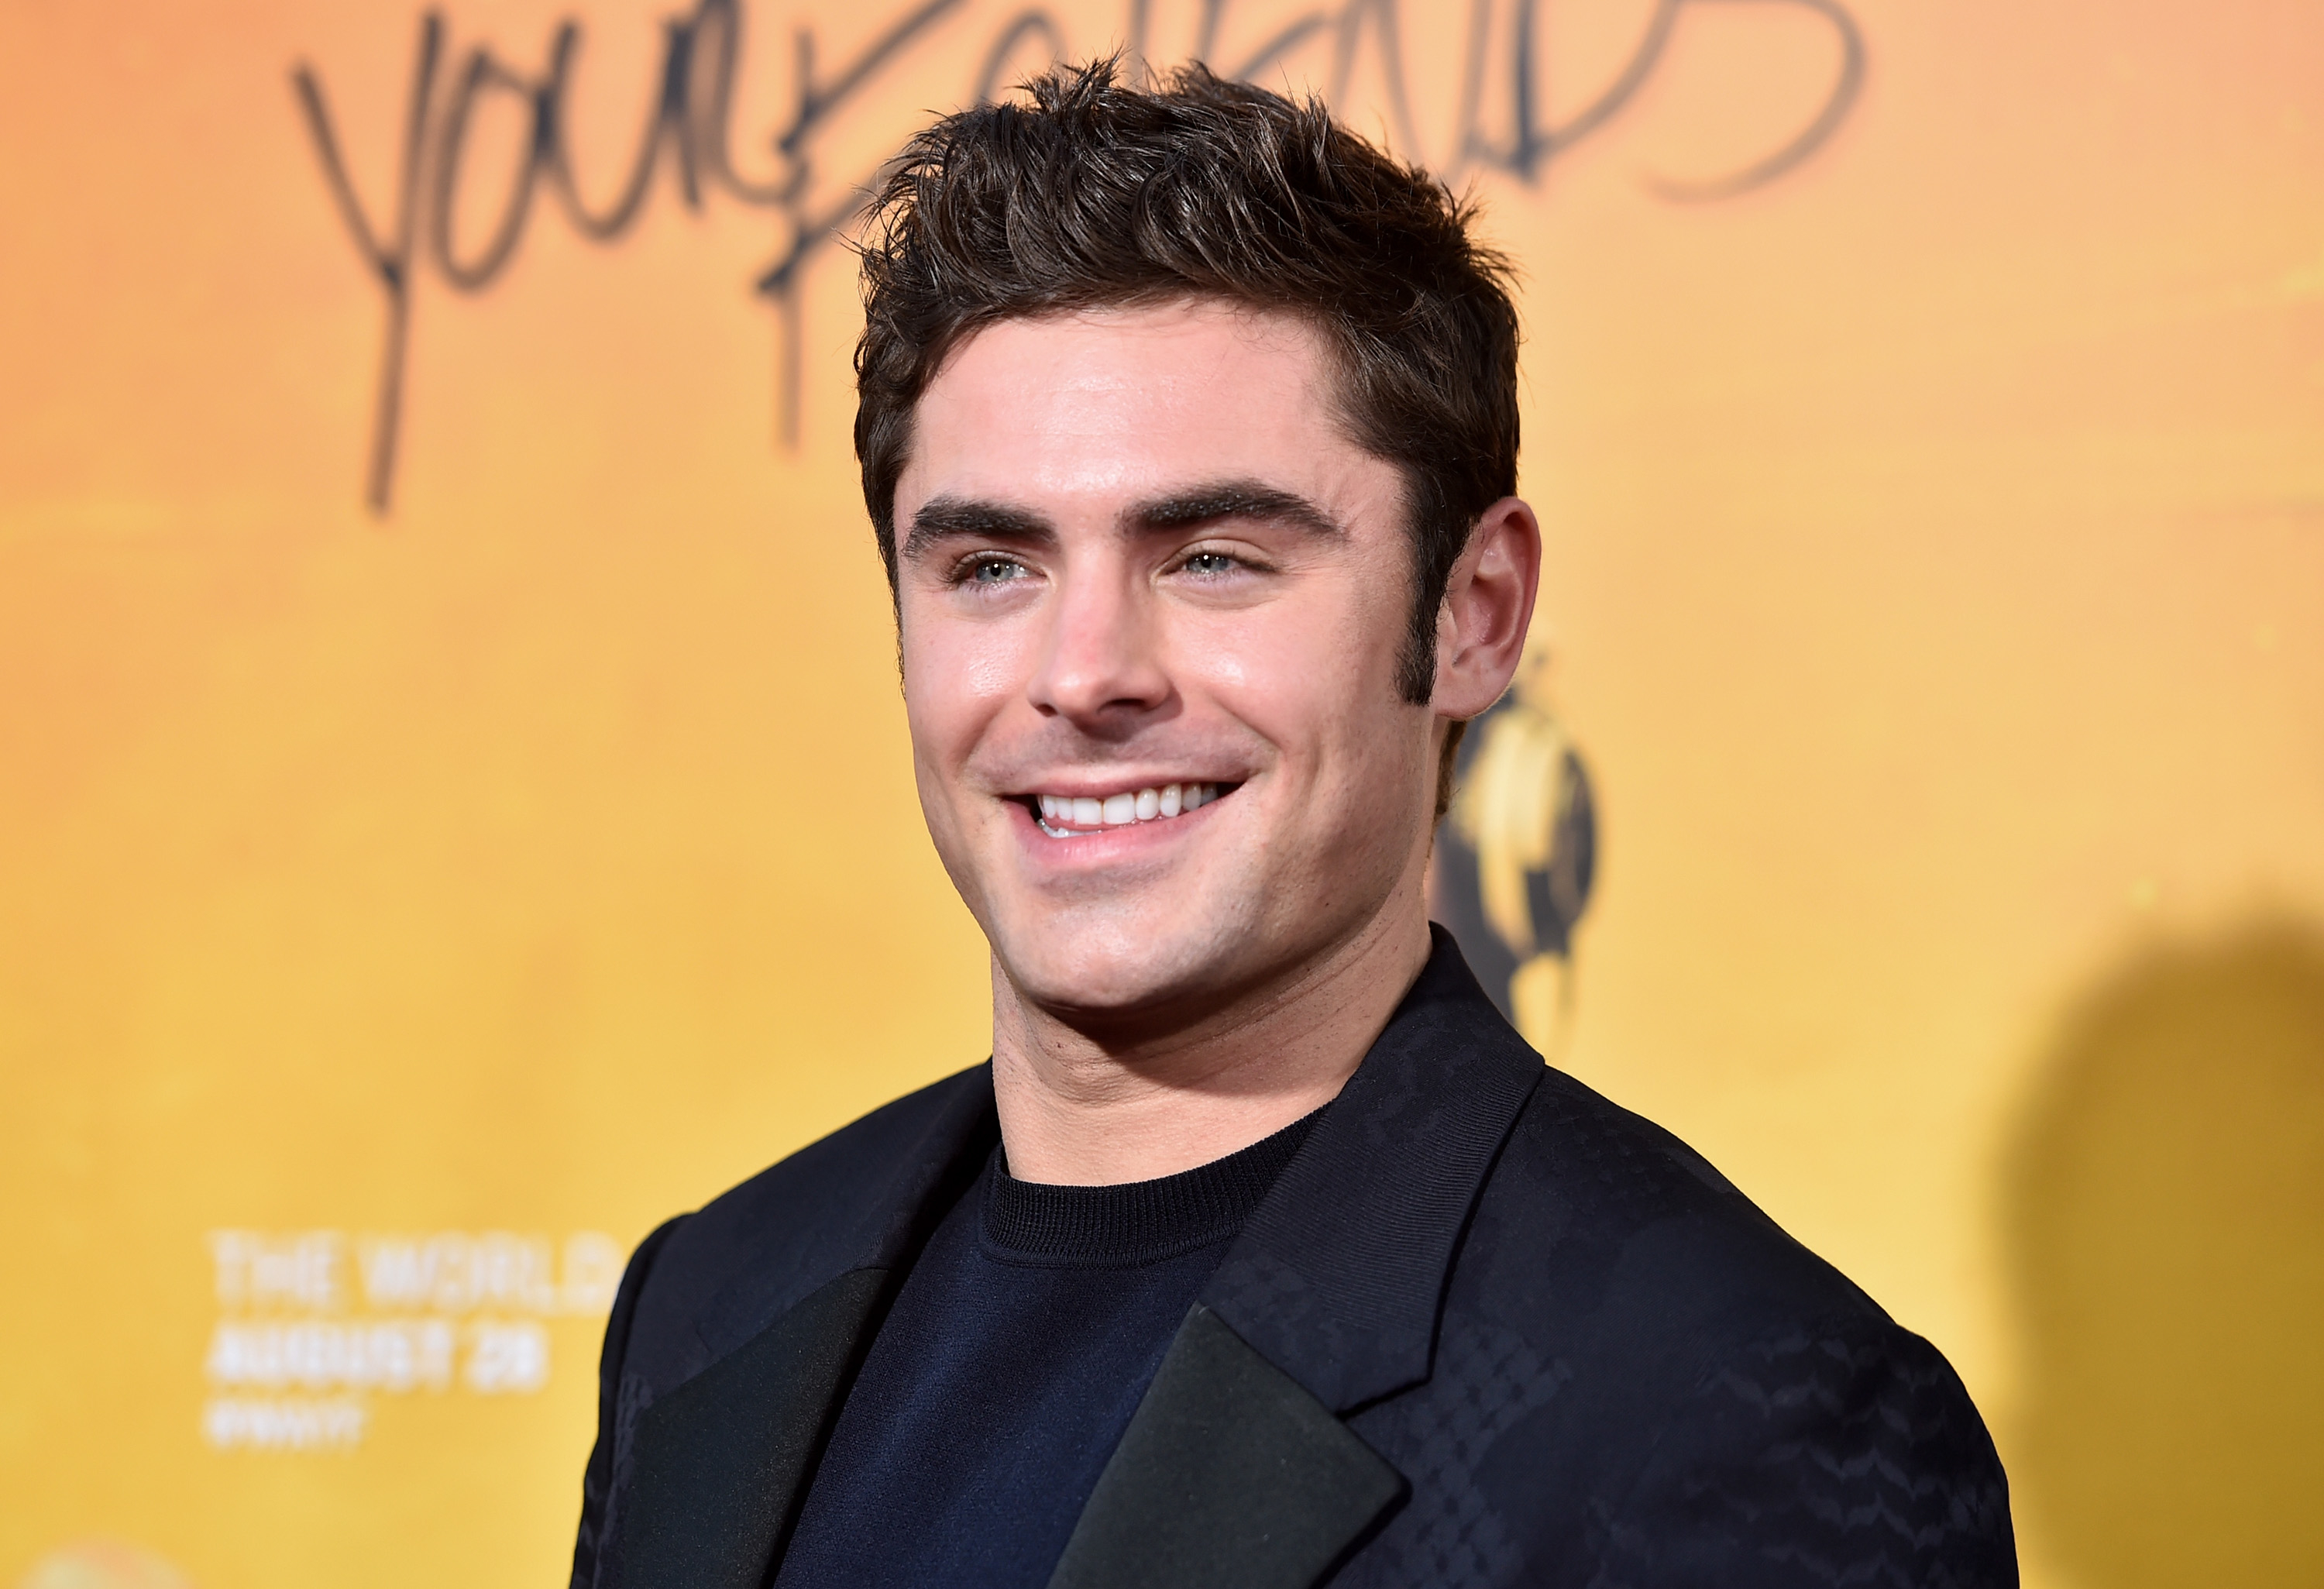 A younger? Zac Efron smiling